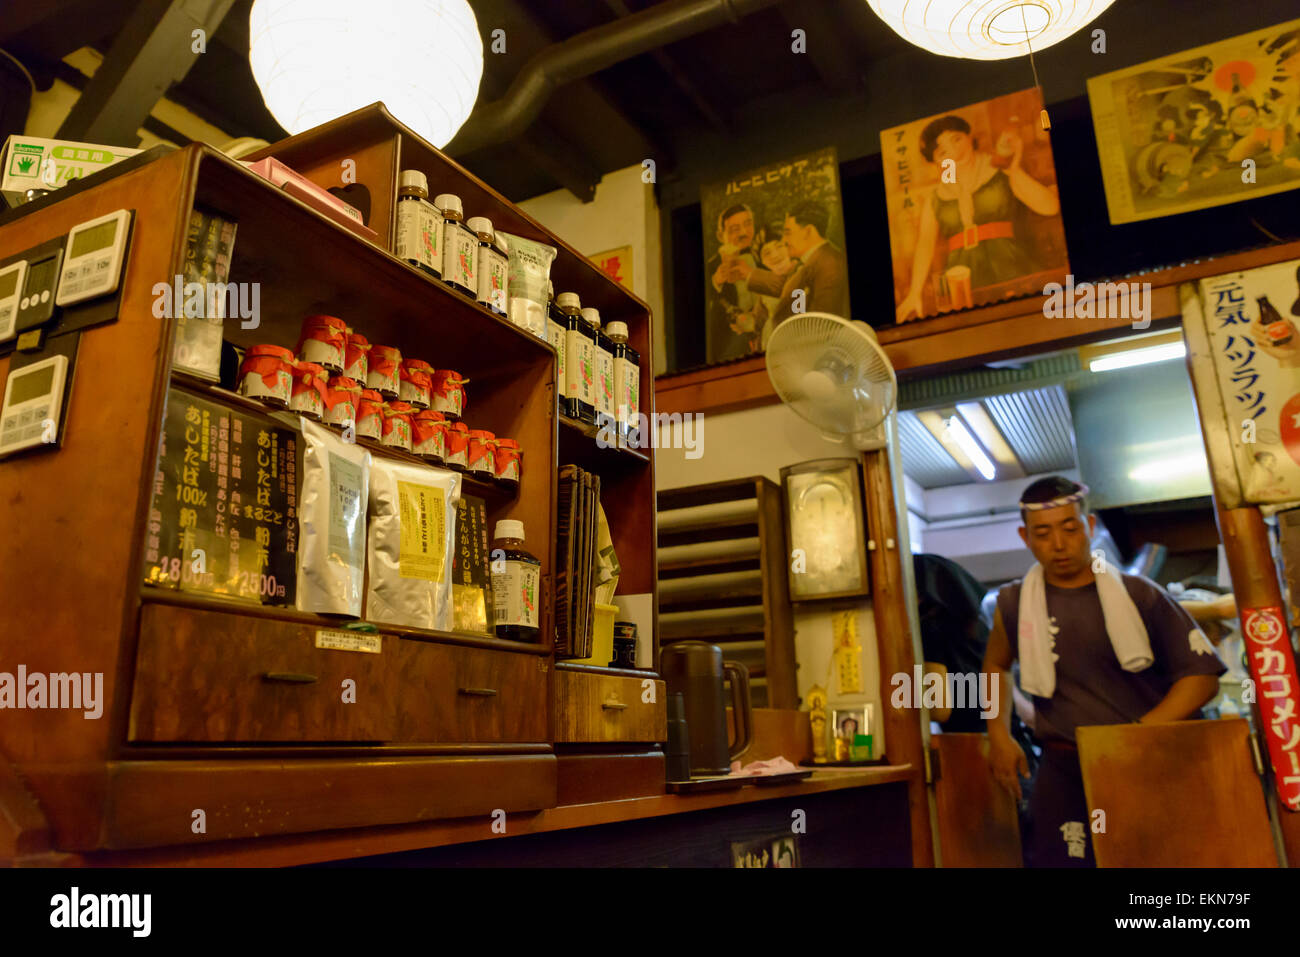 The inside of a Japanese restaurant or cafe in an old, traditional style, from the pre-war part of the Showa era.  Old fashioned; Tokyo, Japan; Asia Stock Photo